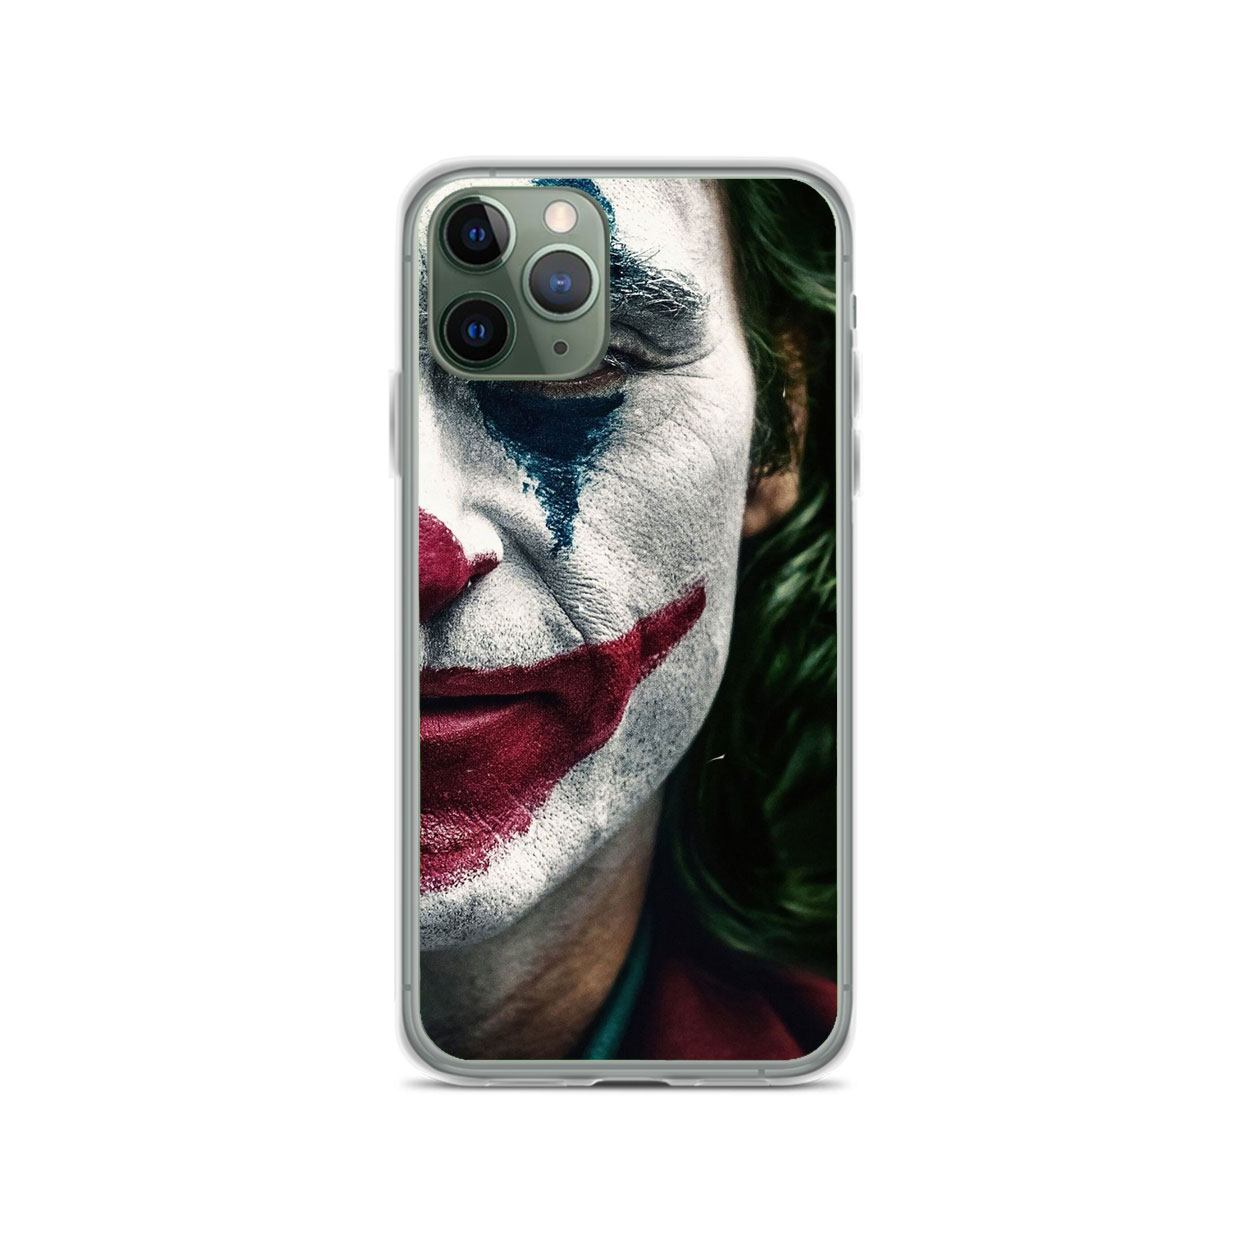 The Joker Face iPhone Case iPhone Case for XS/XS Max,XR,X,8/8 Plus,7 ...